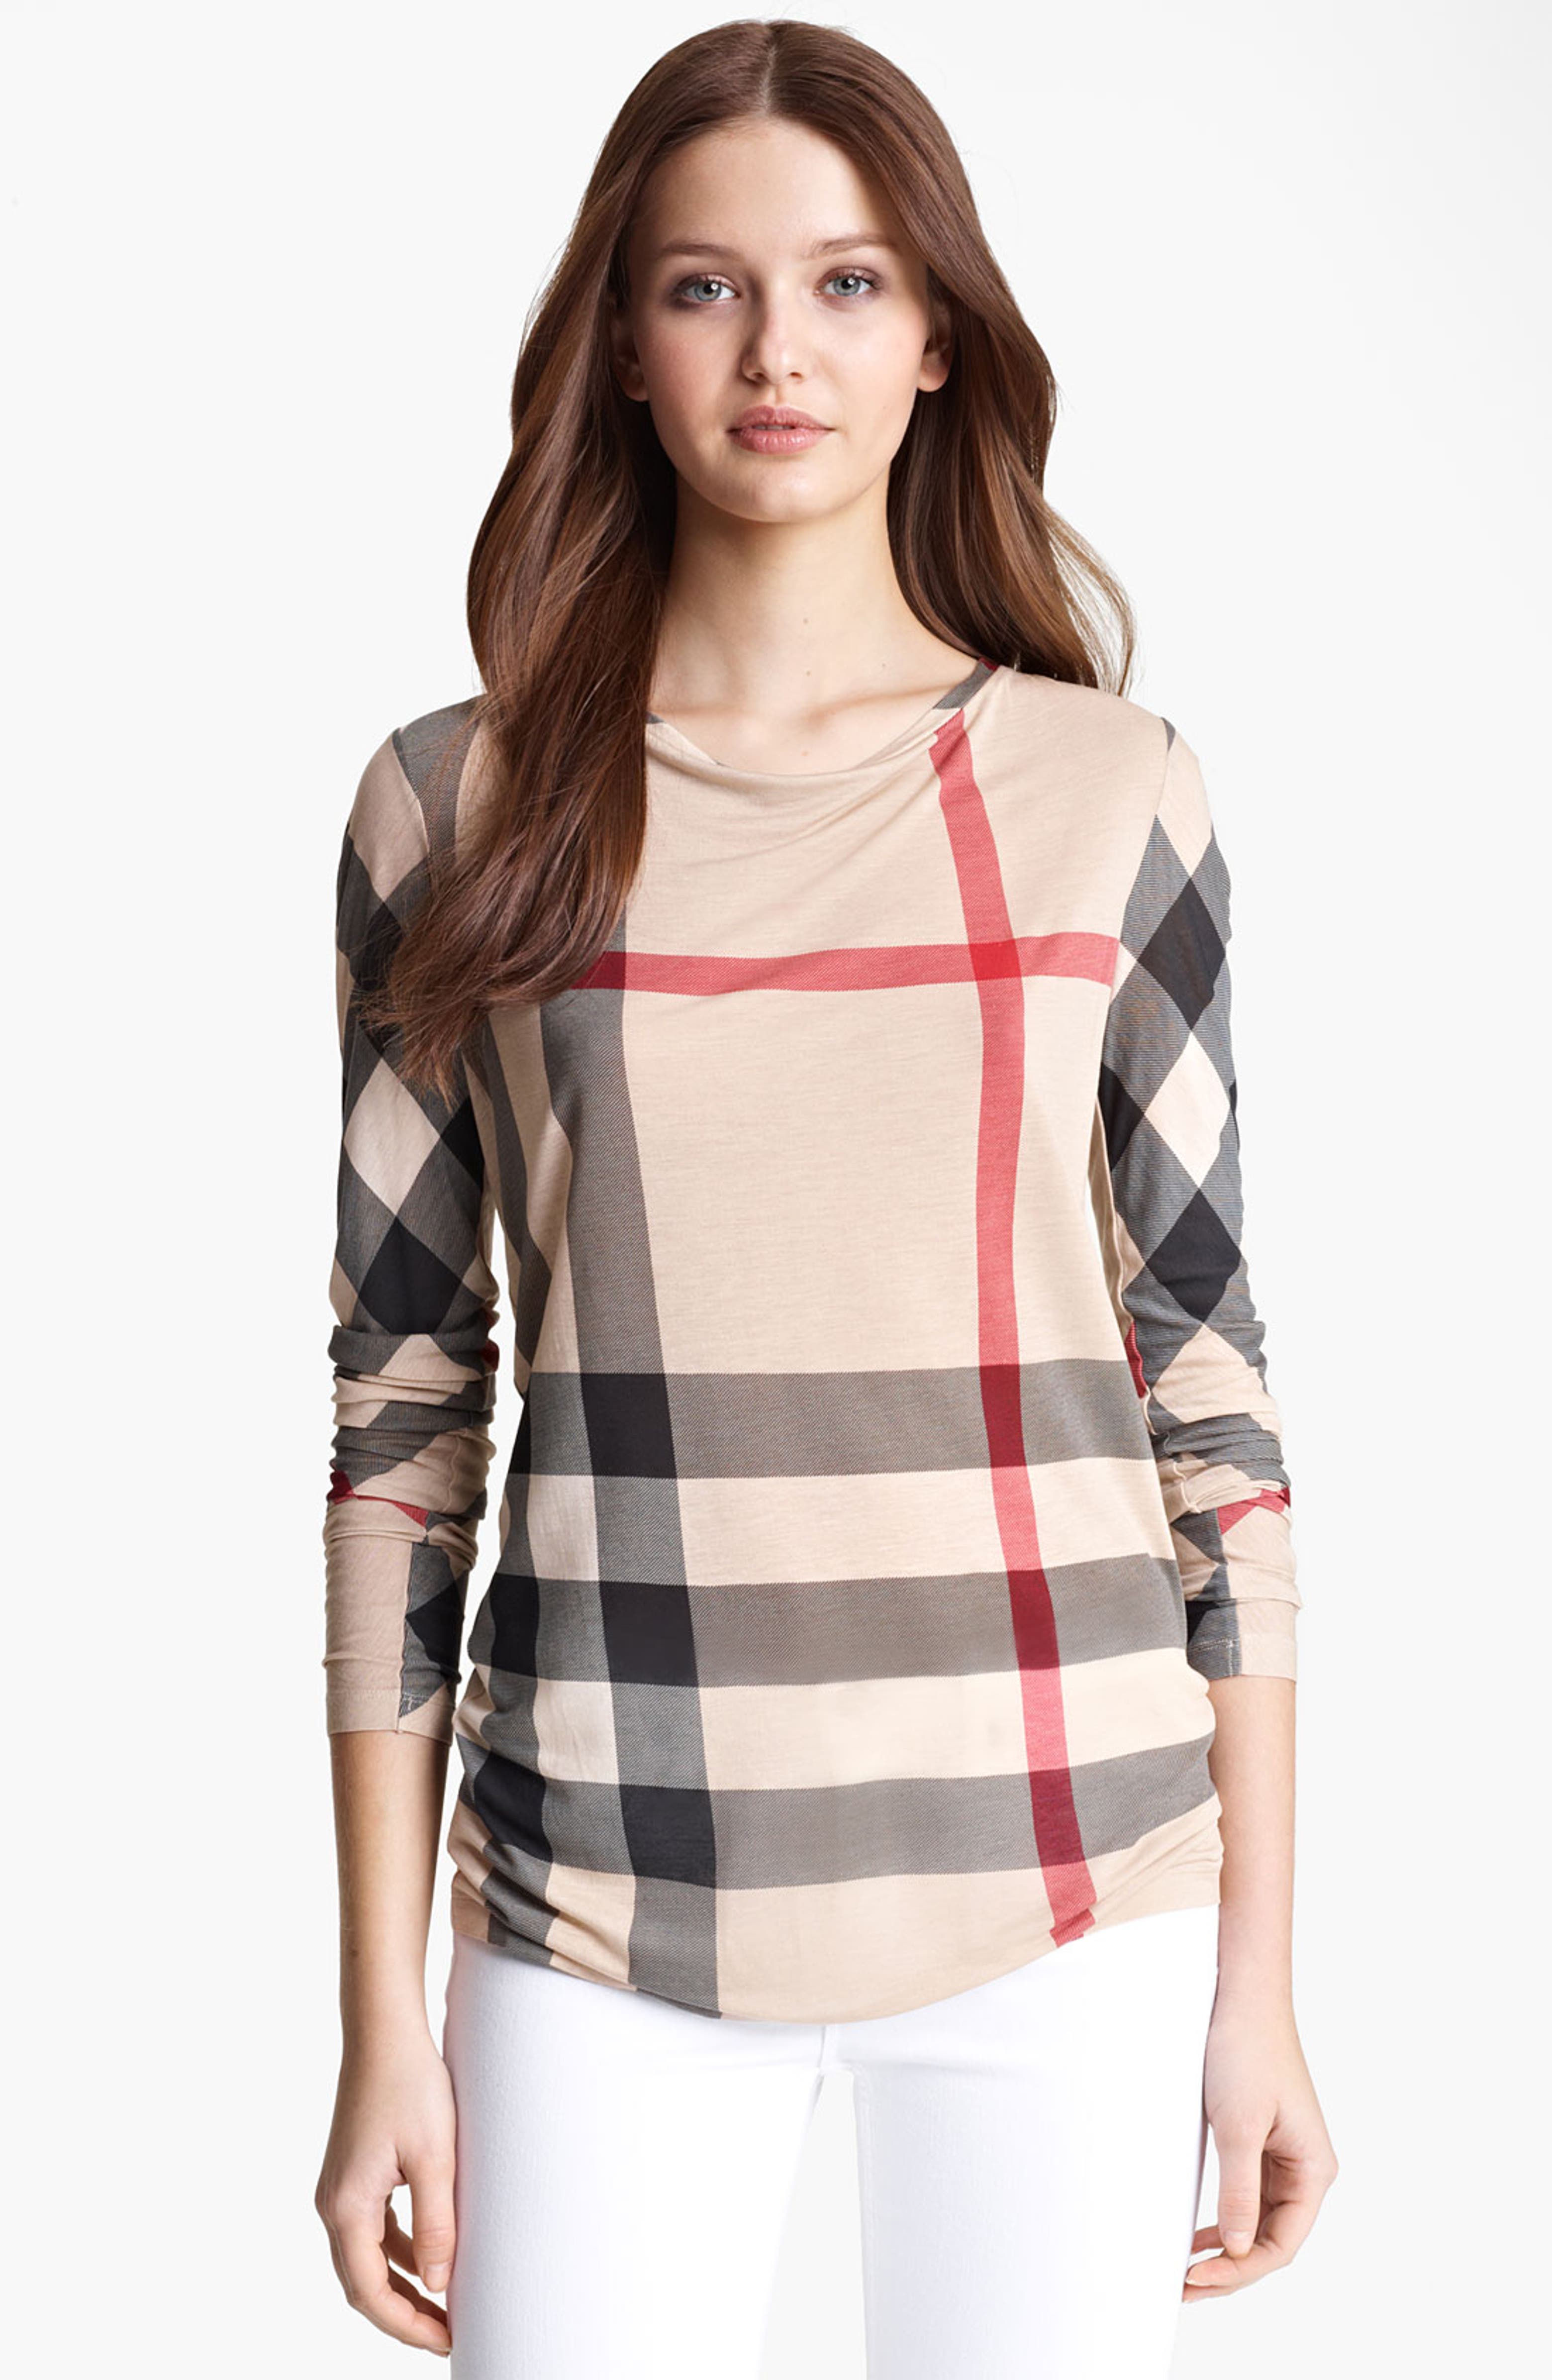 Burberry Brit Check Print Tee | Nordstrom